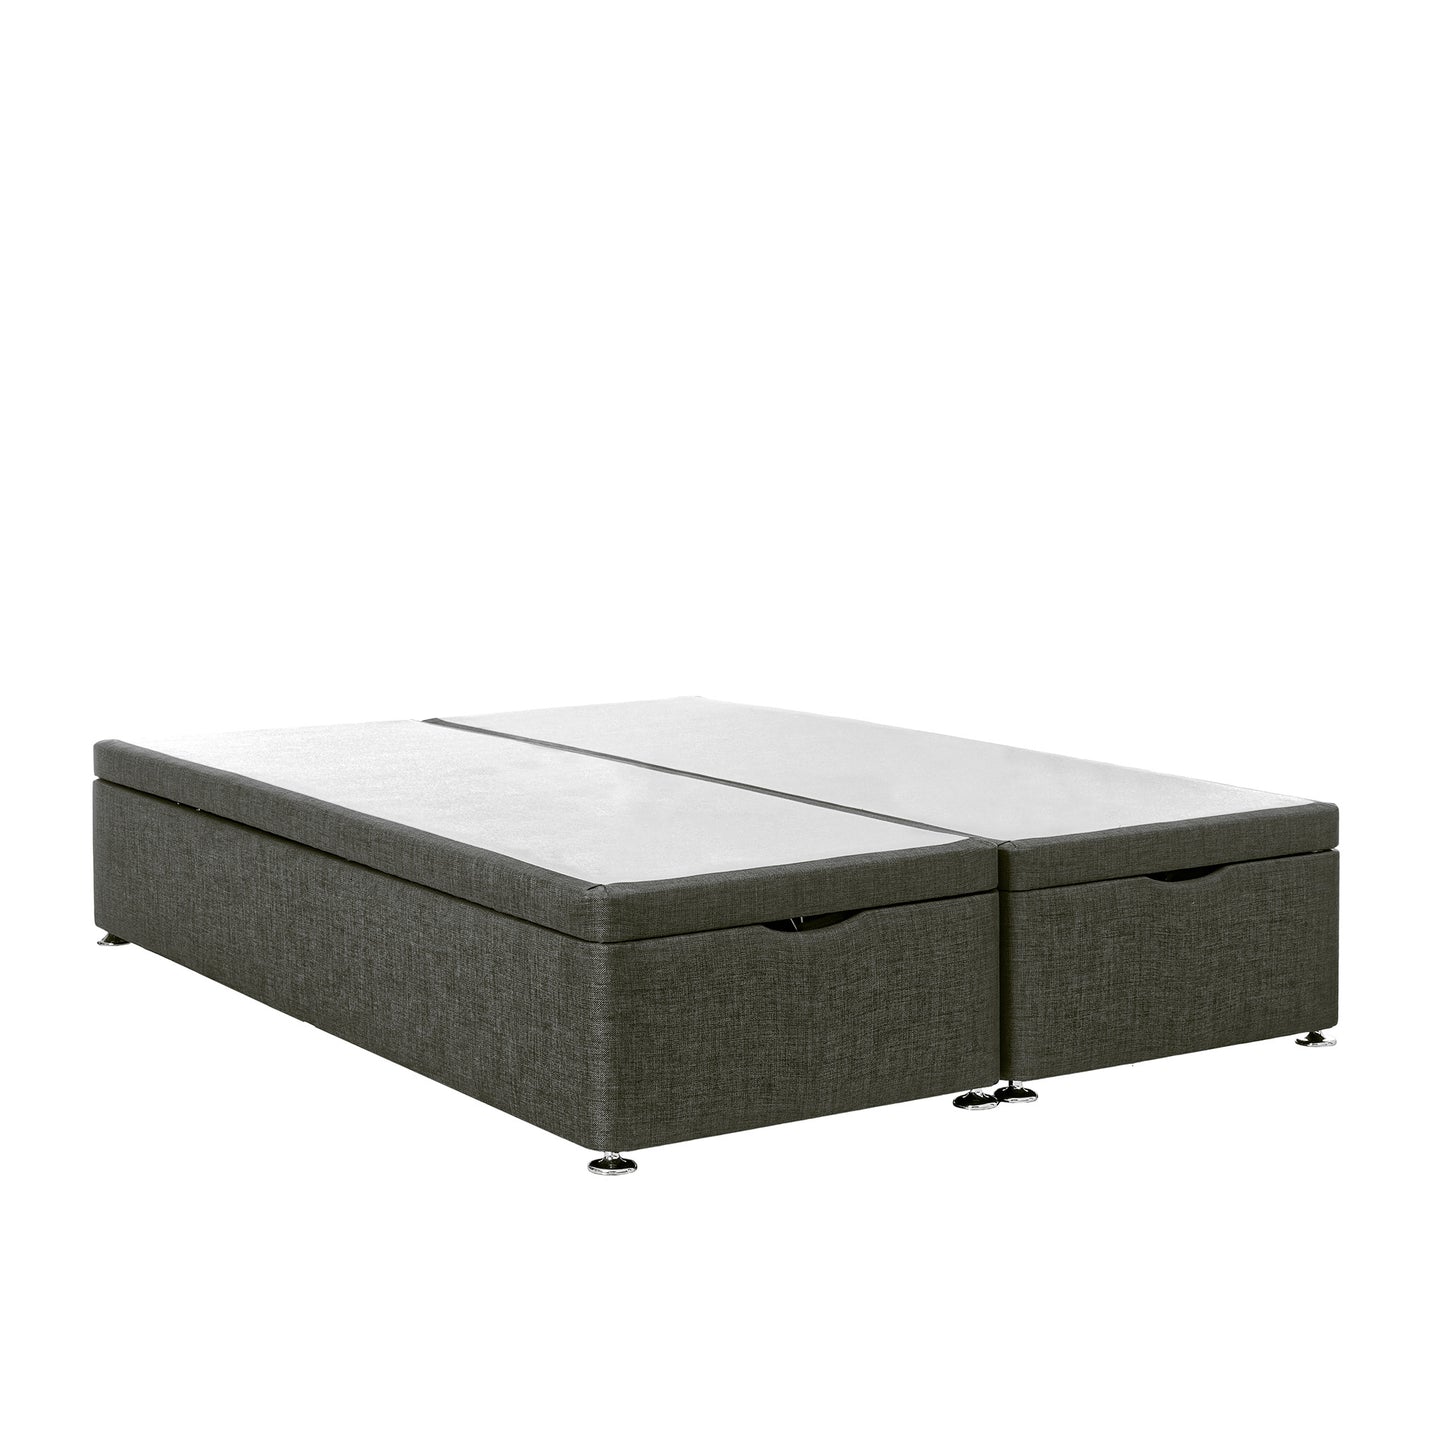 Airsprung End-Lift Double Charcoal Ottoman Closed